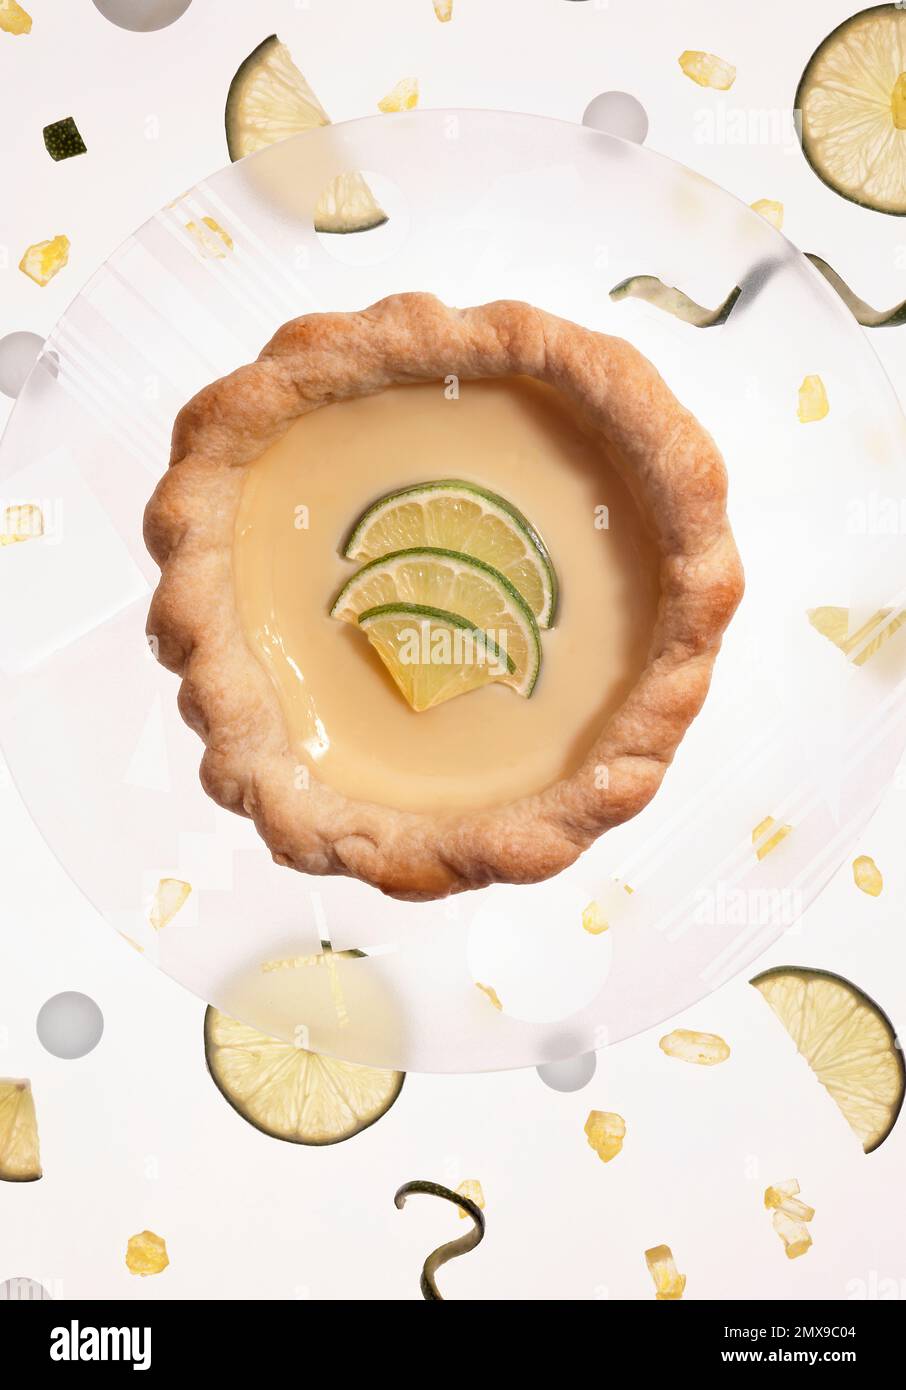 Lime tart of tartlet on decorative glass plate.  Overhead photograph, plate is surrounded by lime twists, lime slices and lime rock candy. Stock Photo